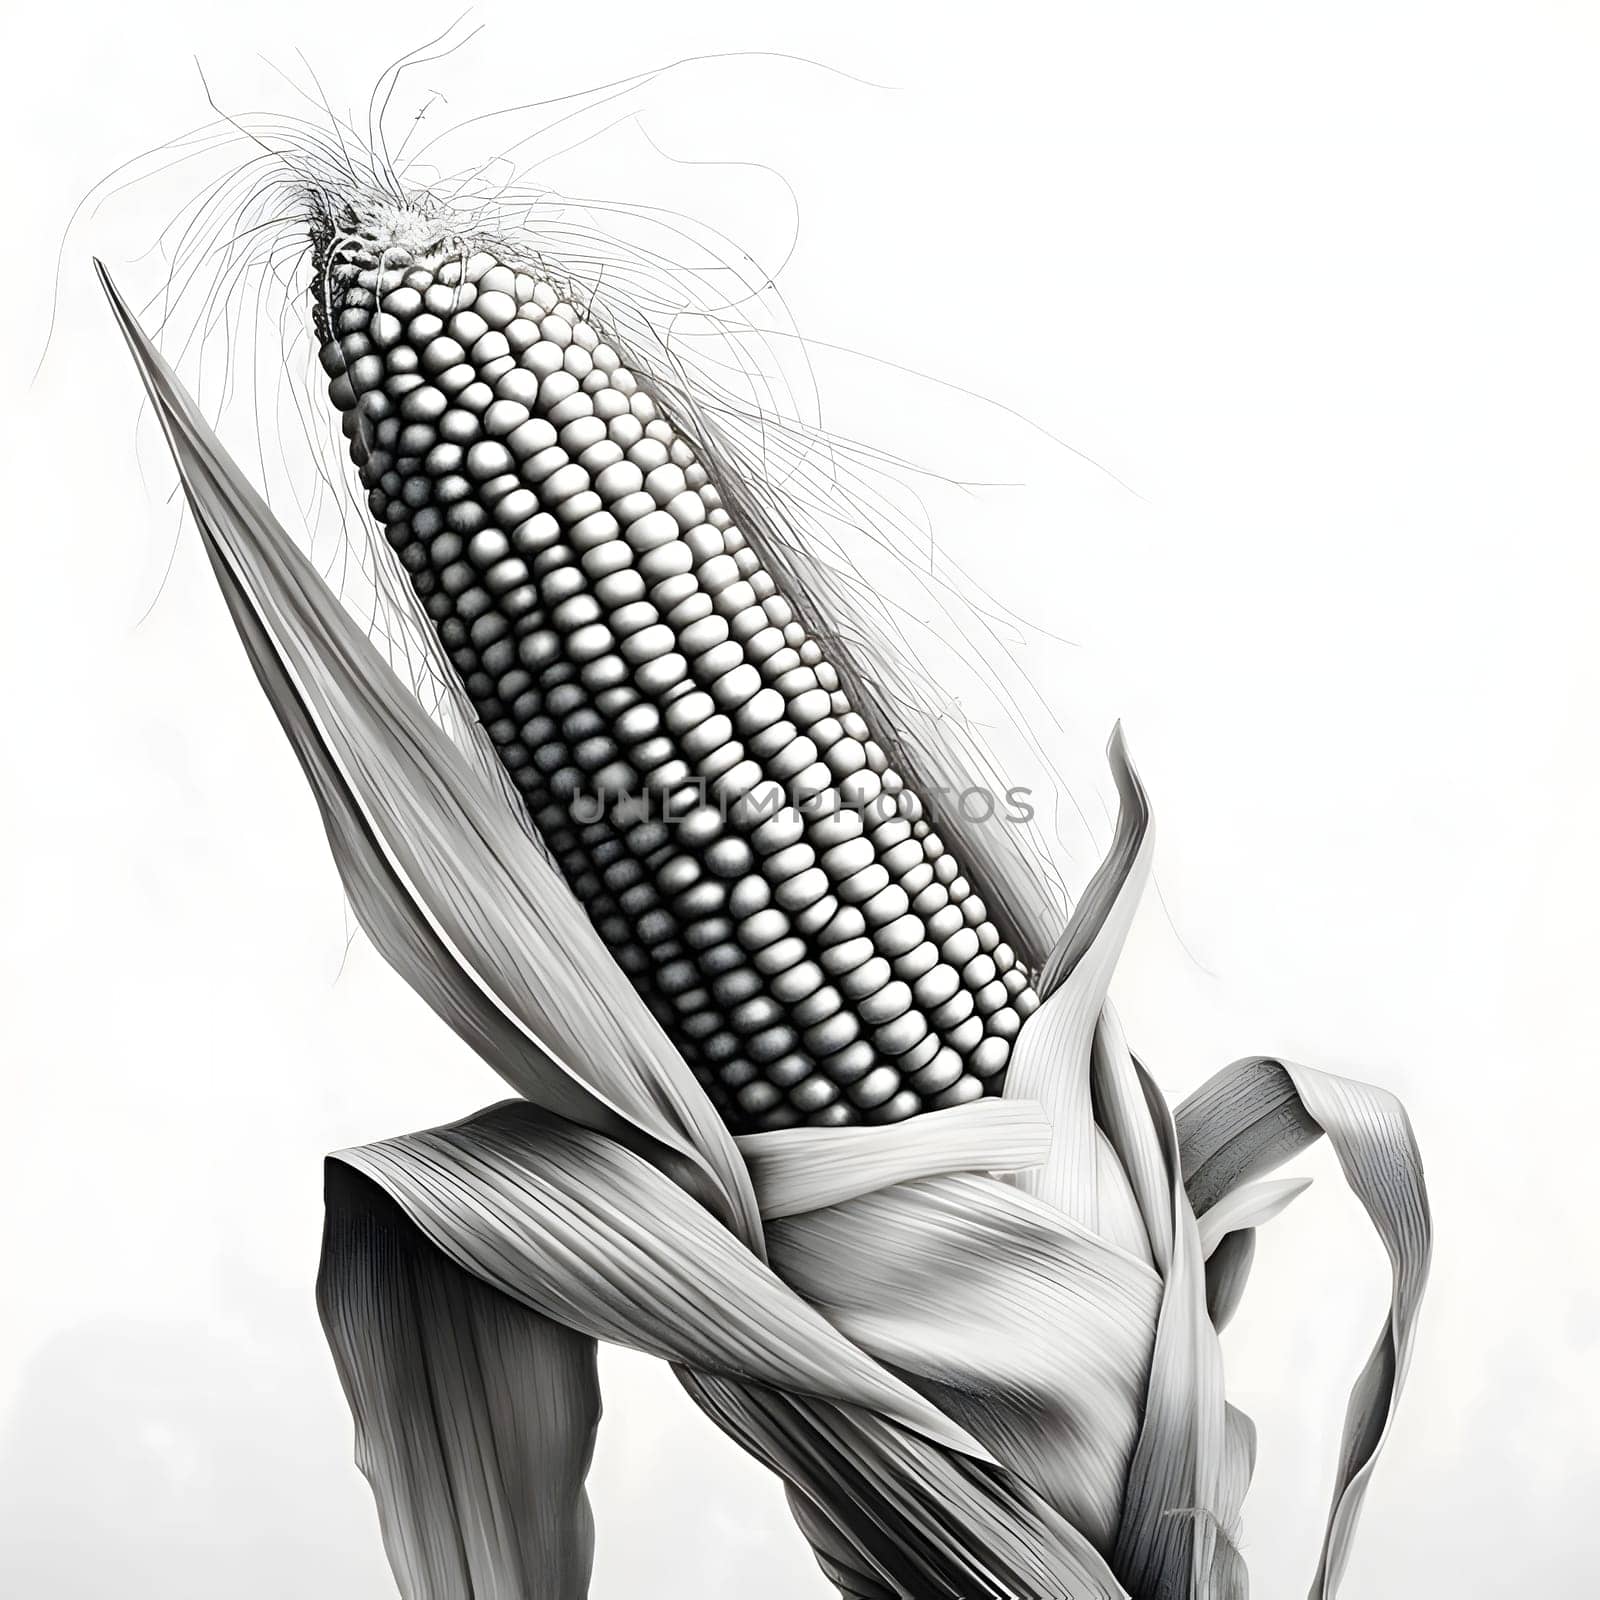 Black and white corn cob on a plant. Corn as a dish of thanksgiving for the harvest. by ThemesS